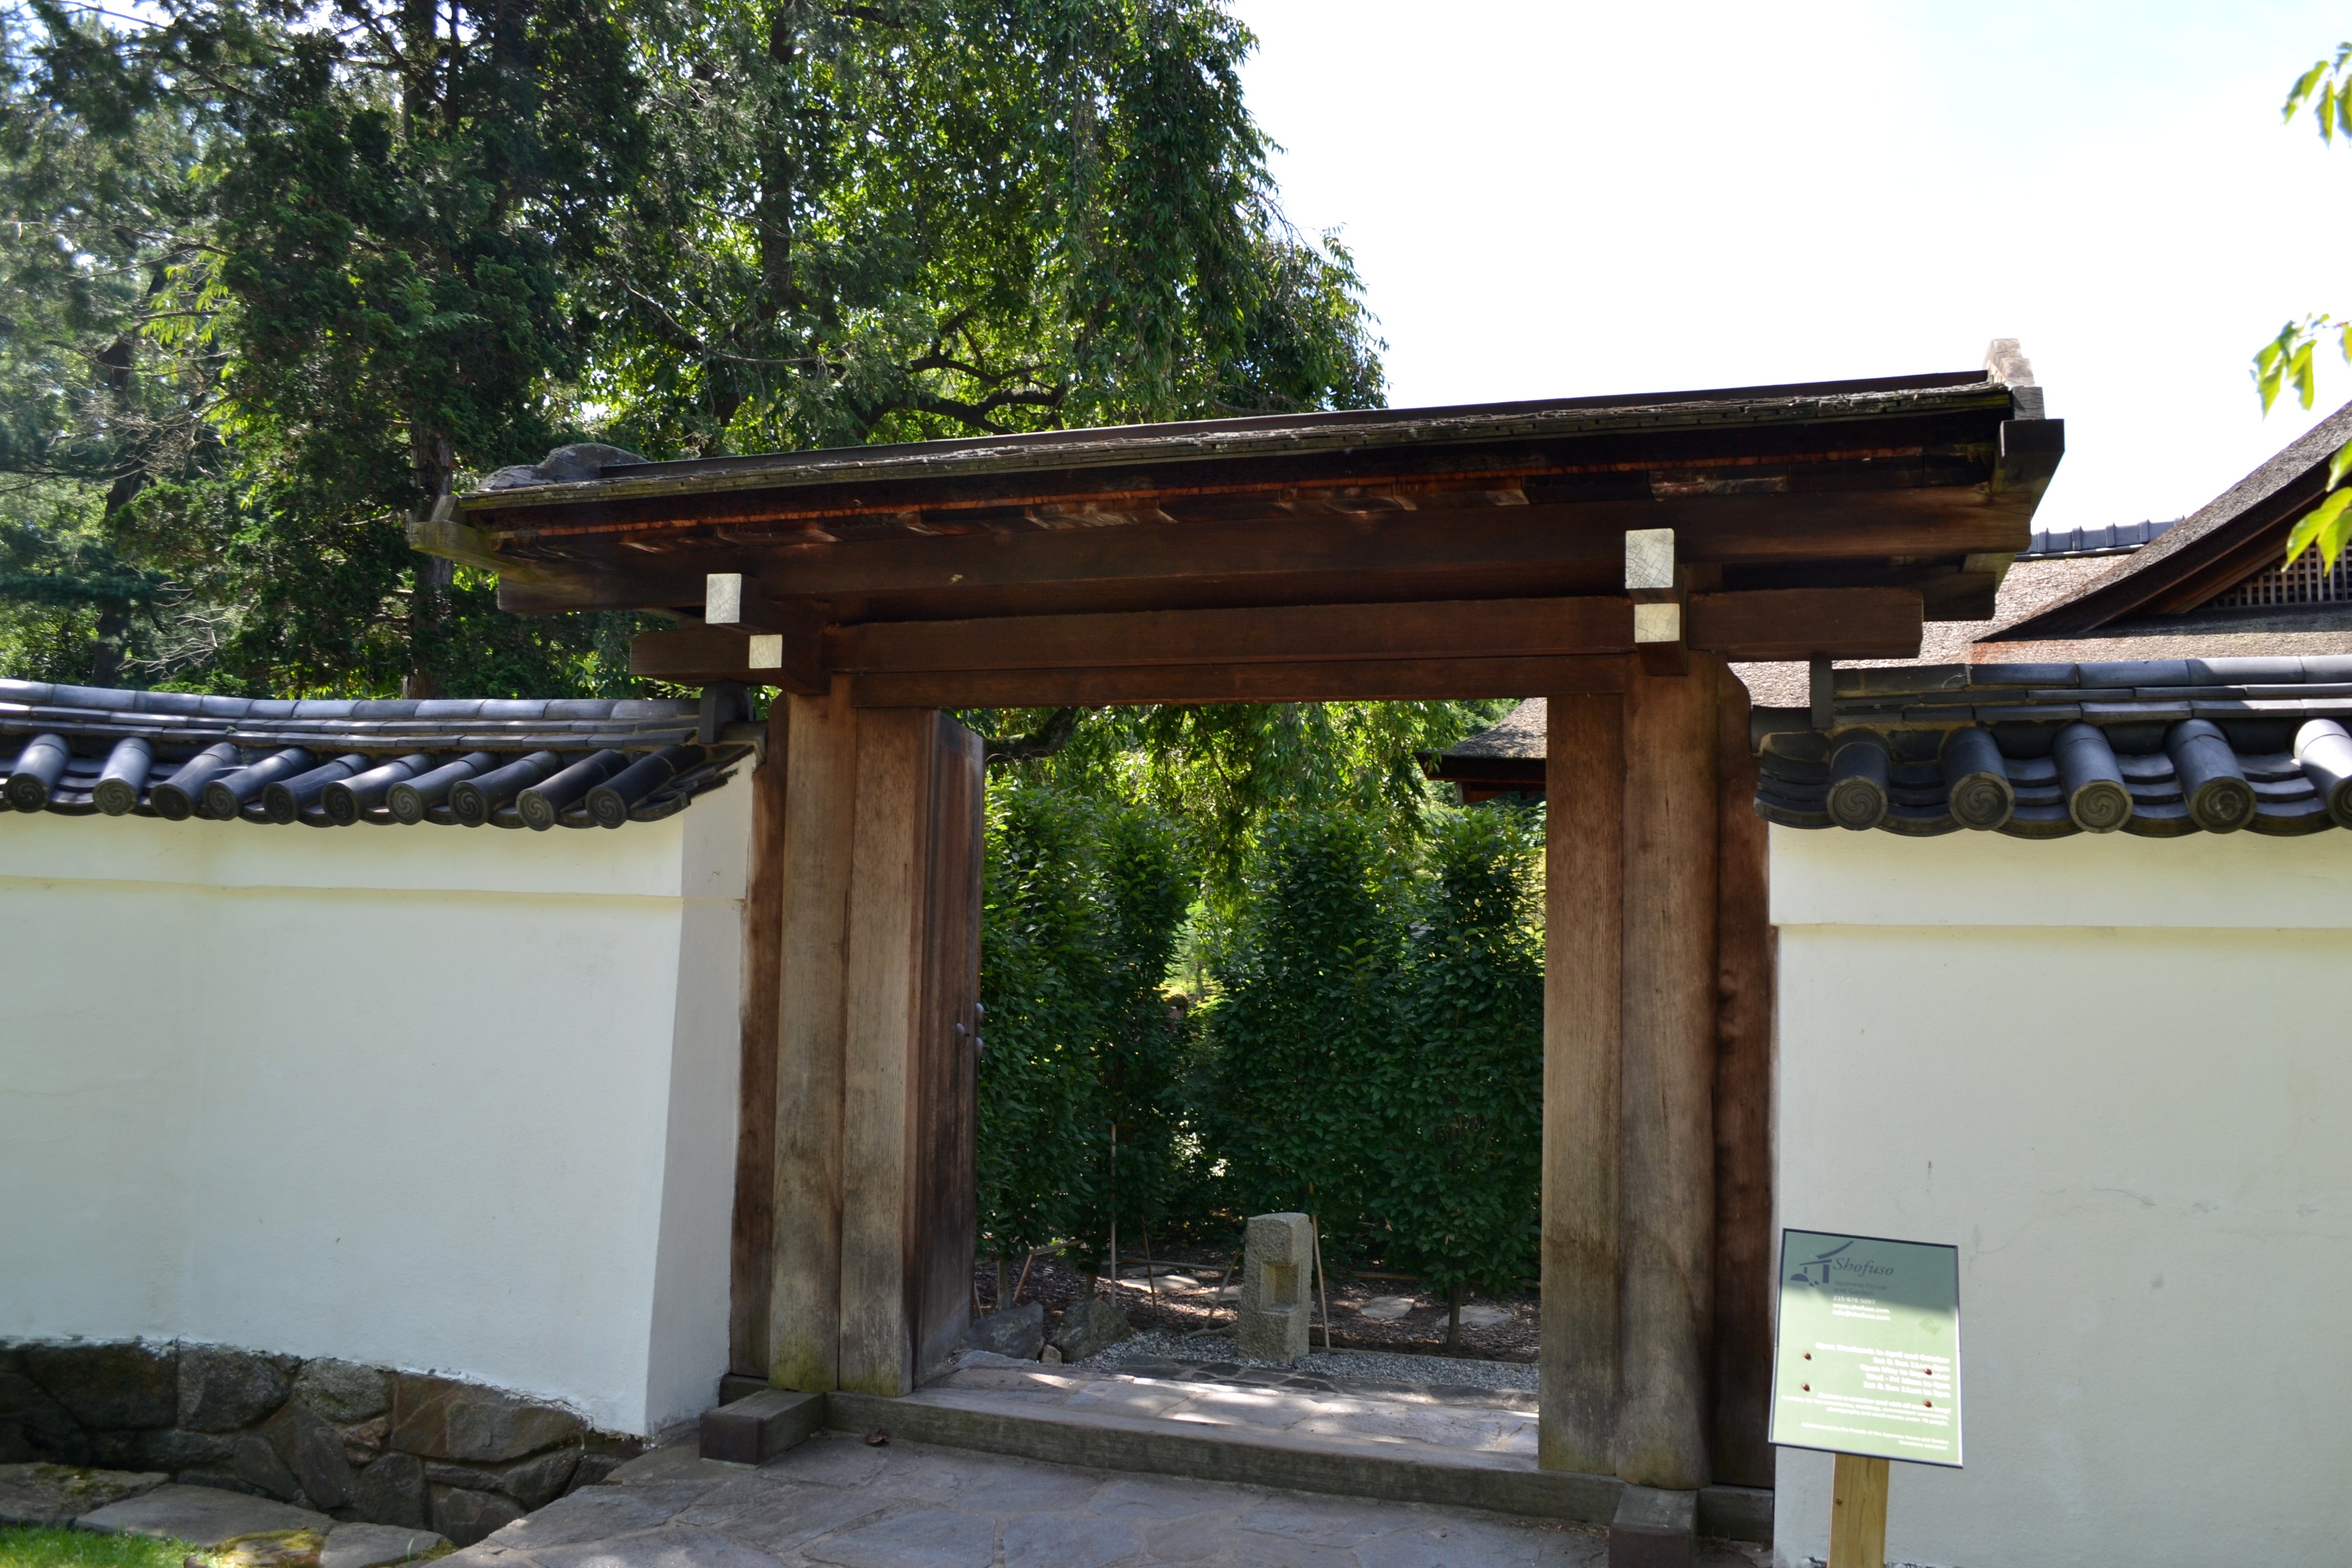 The historic entryway gate is an important feature of Shofuso